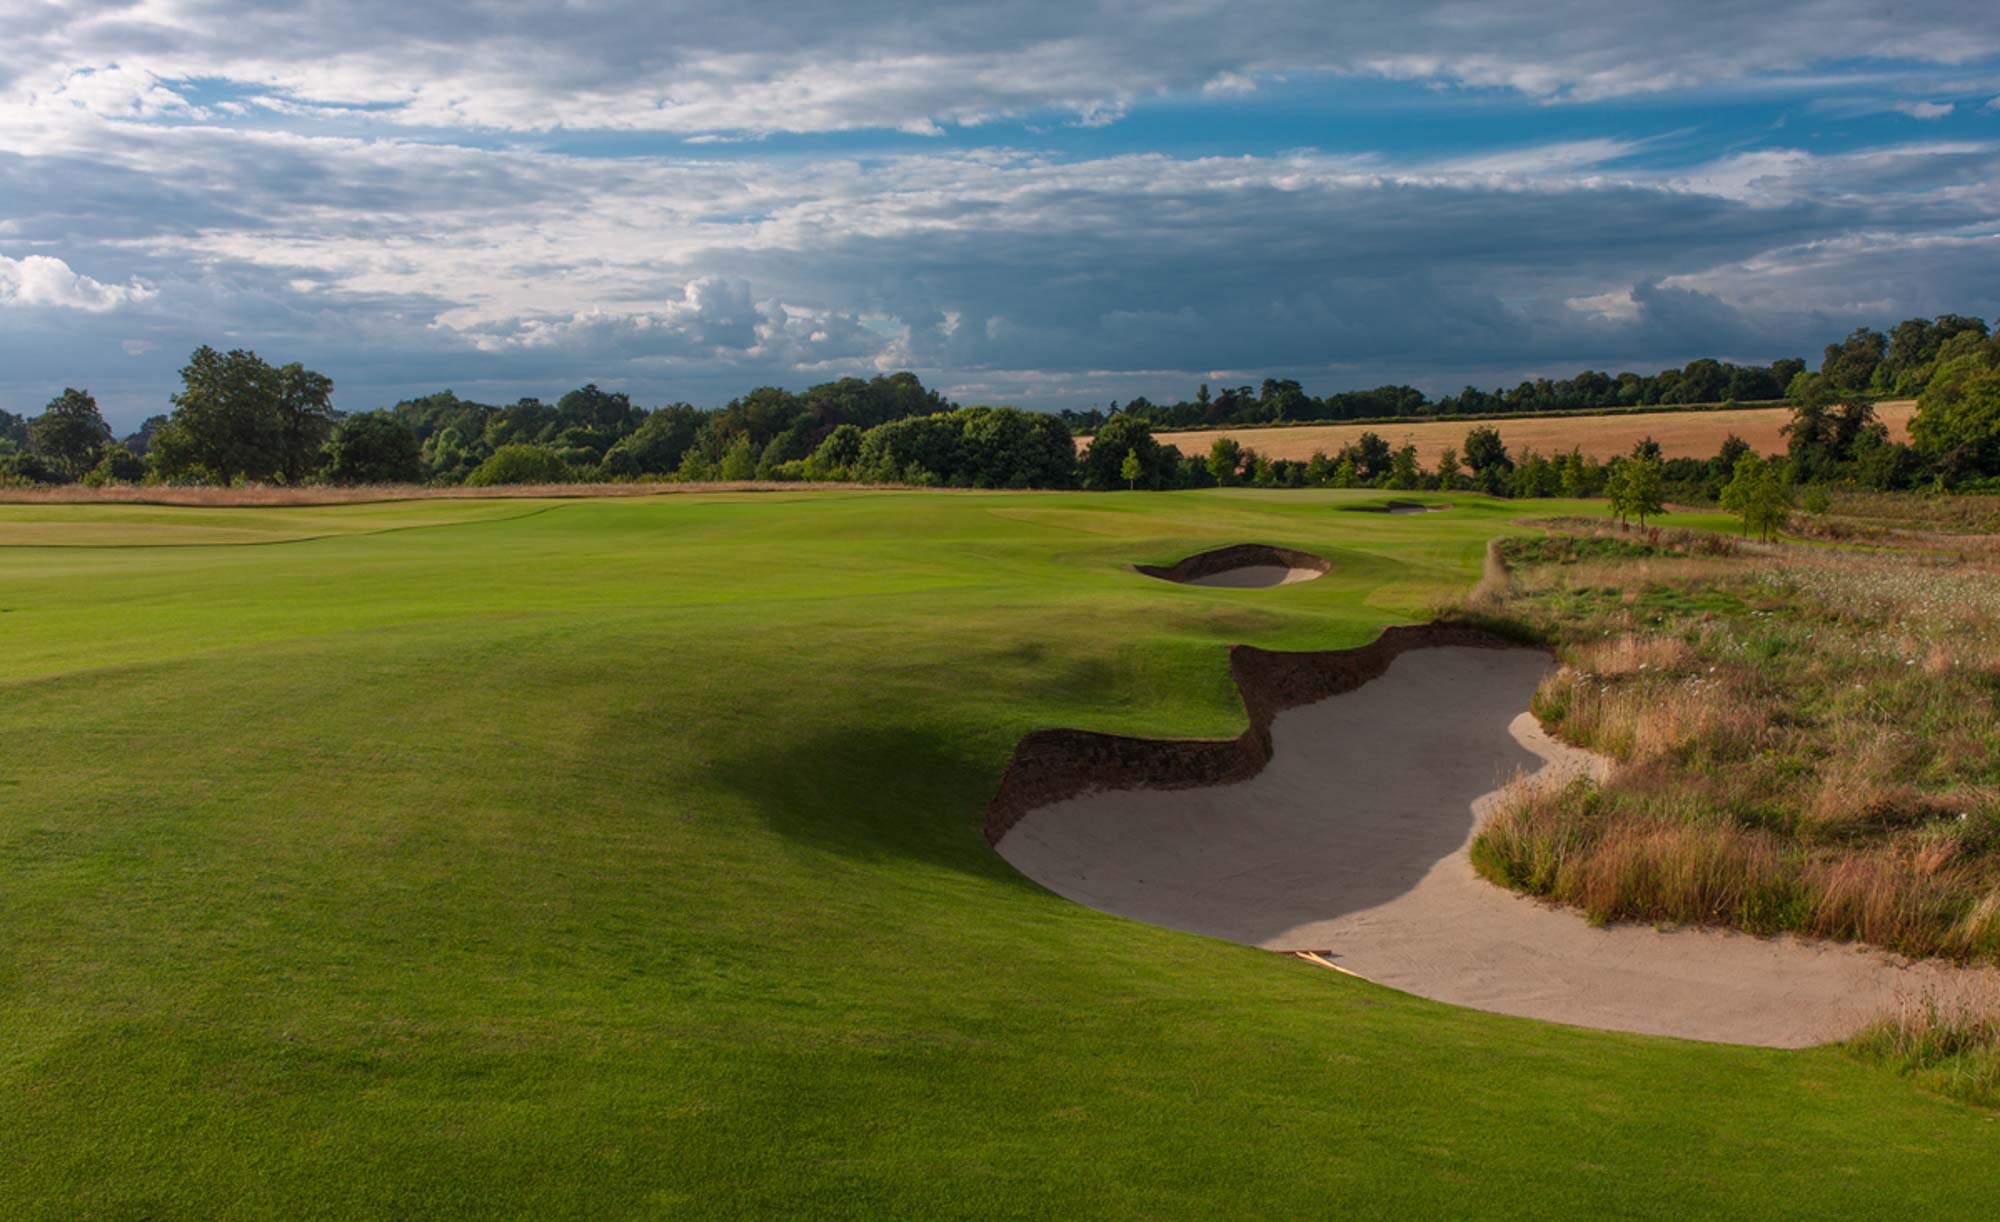 A fairway bunker at Beaverbrook Golf Course in Surrey, England.